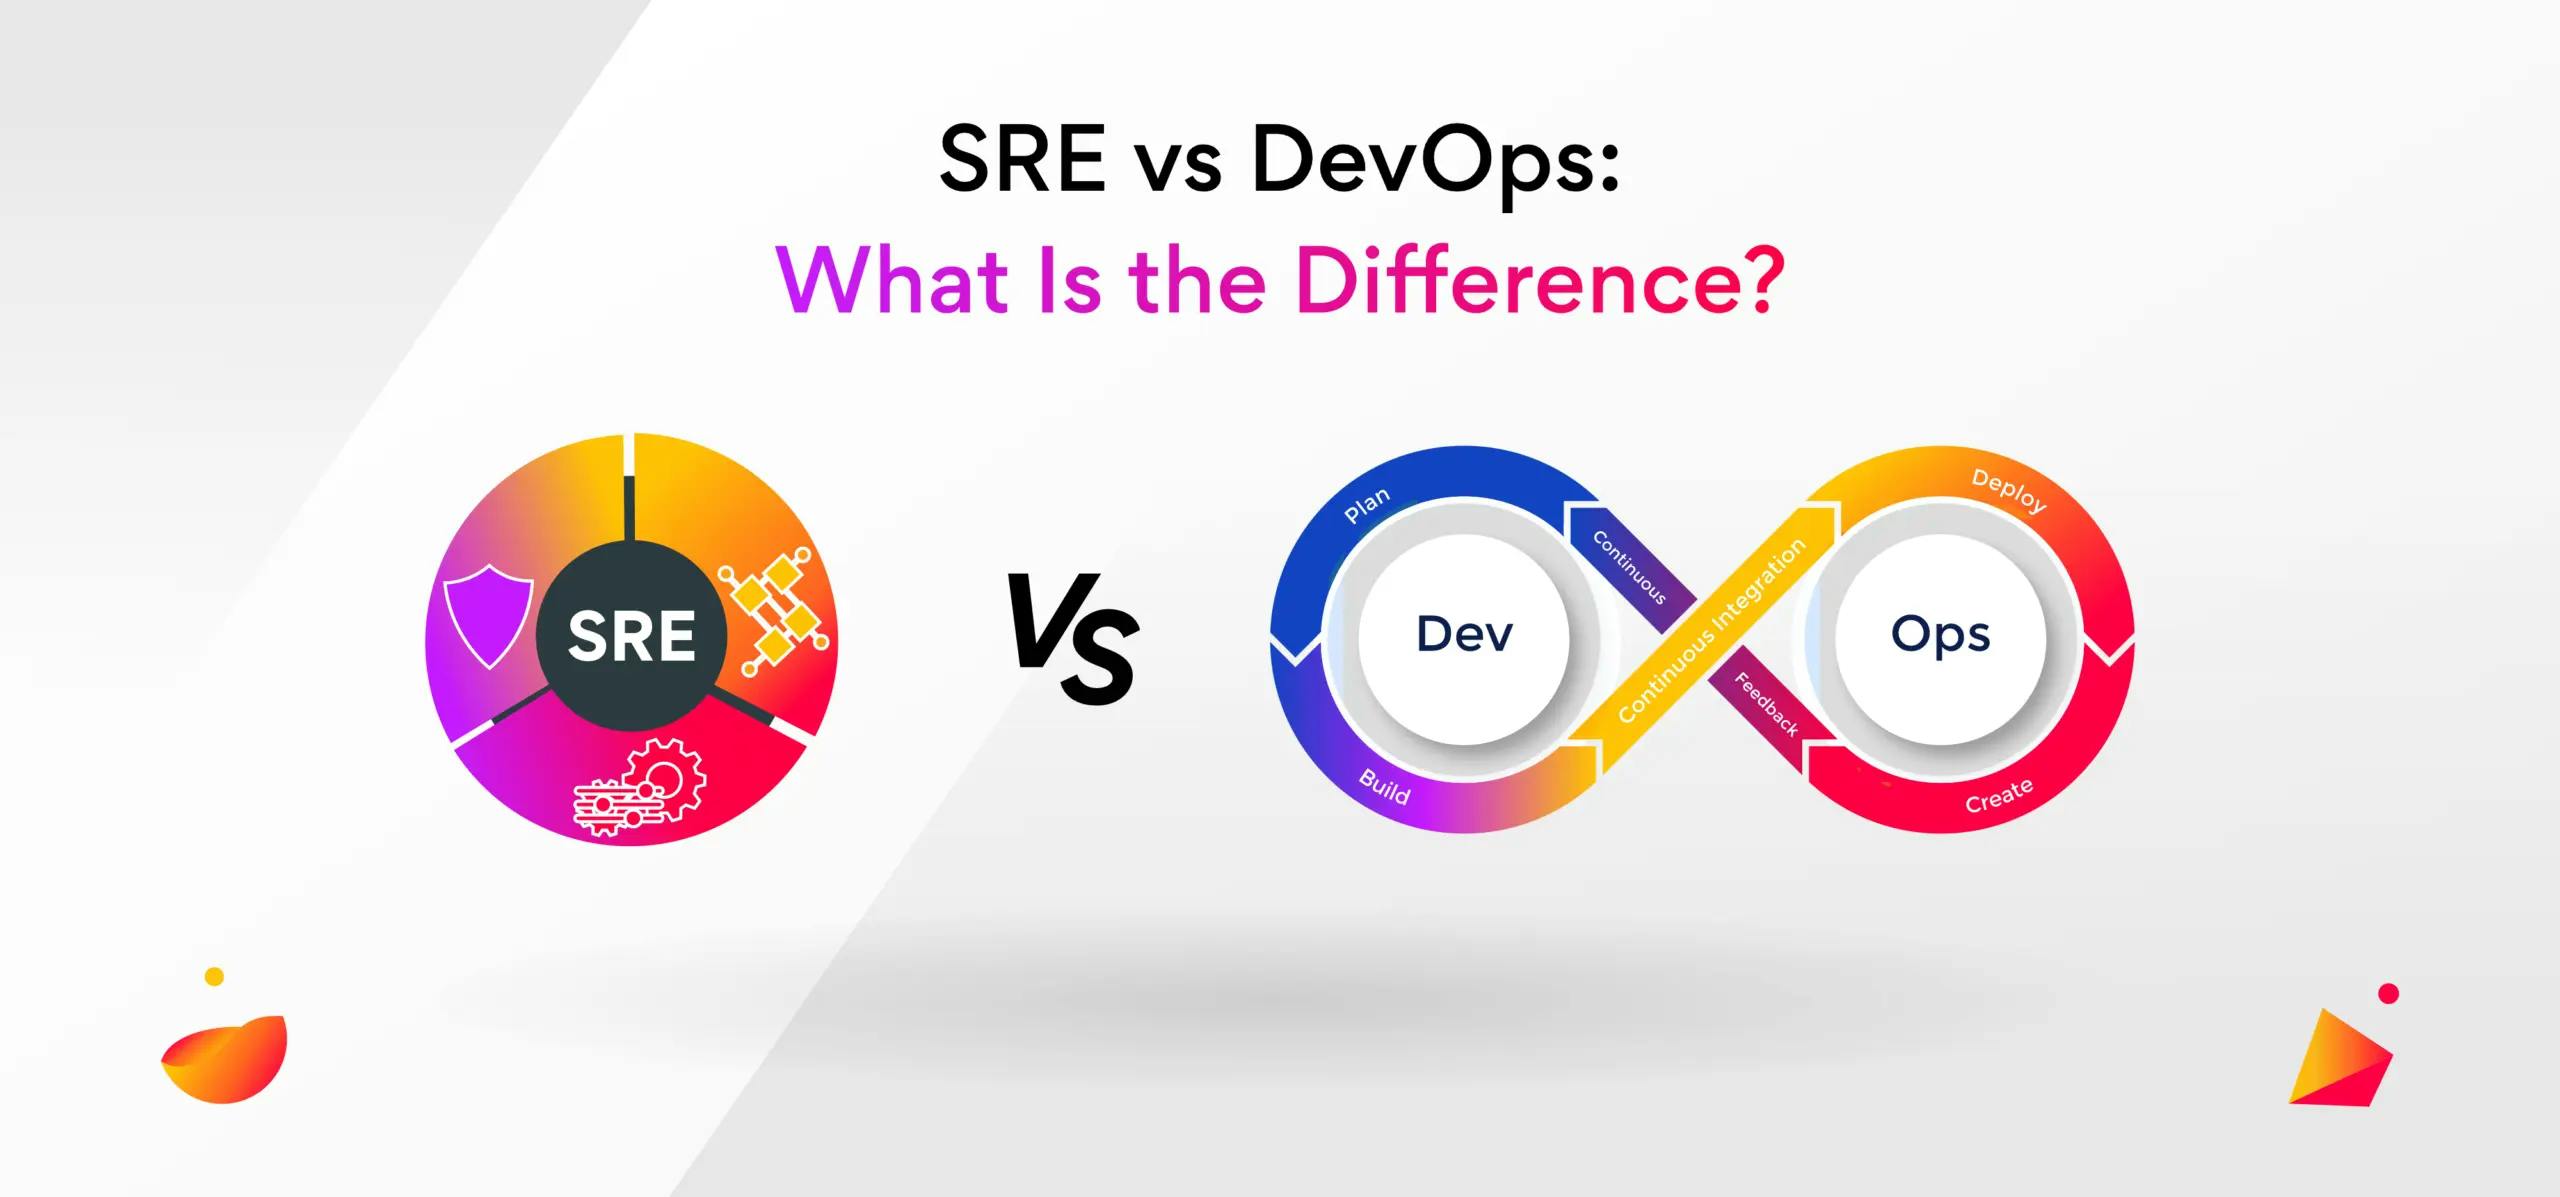 SRE vs DevOps: What Is the Difference?